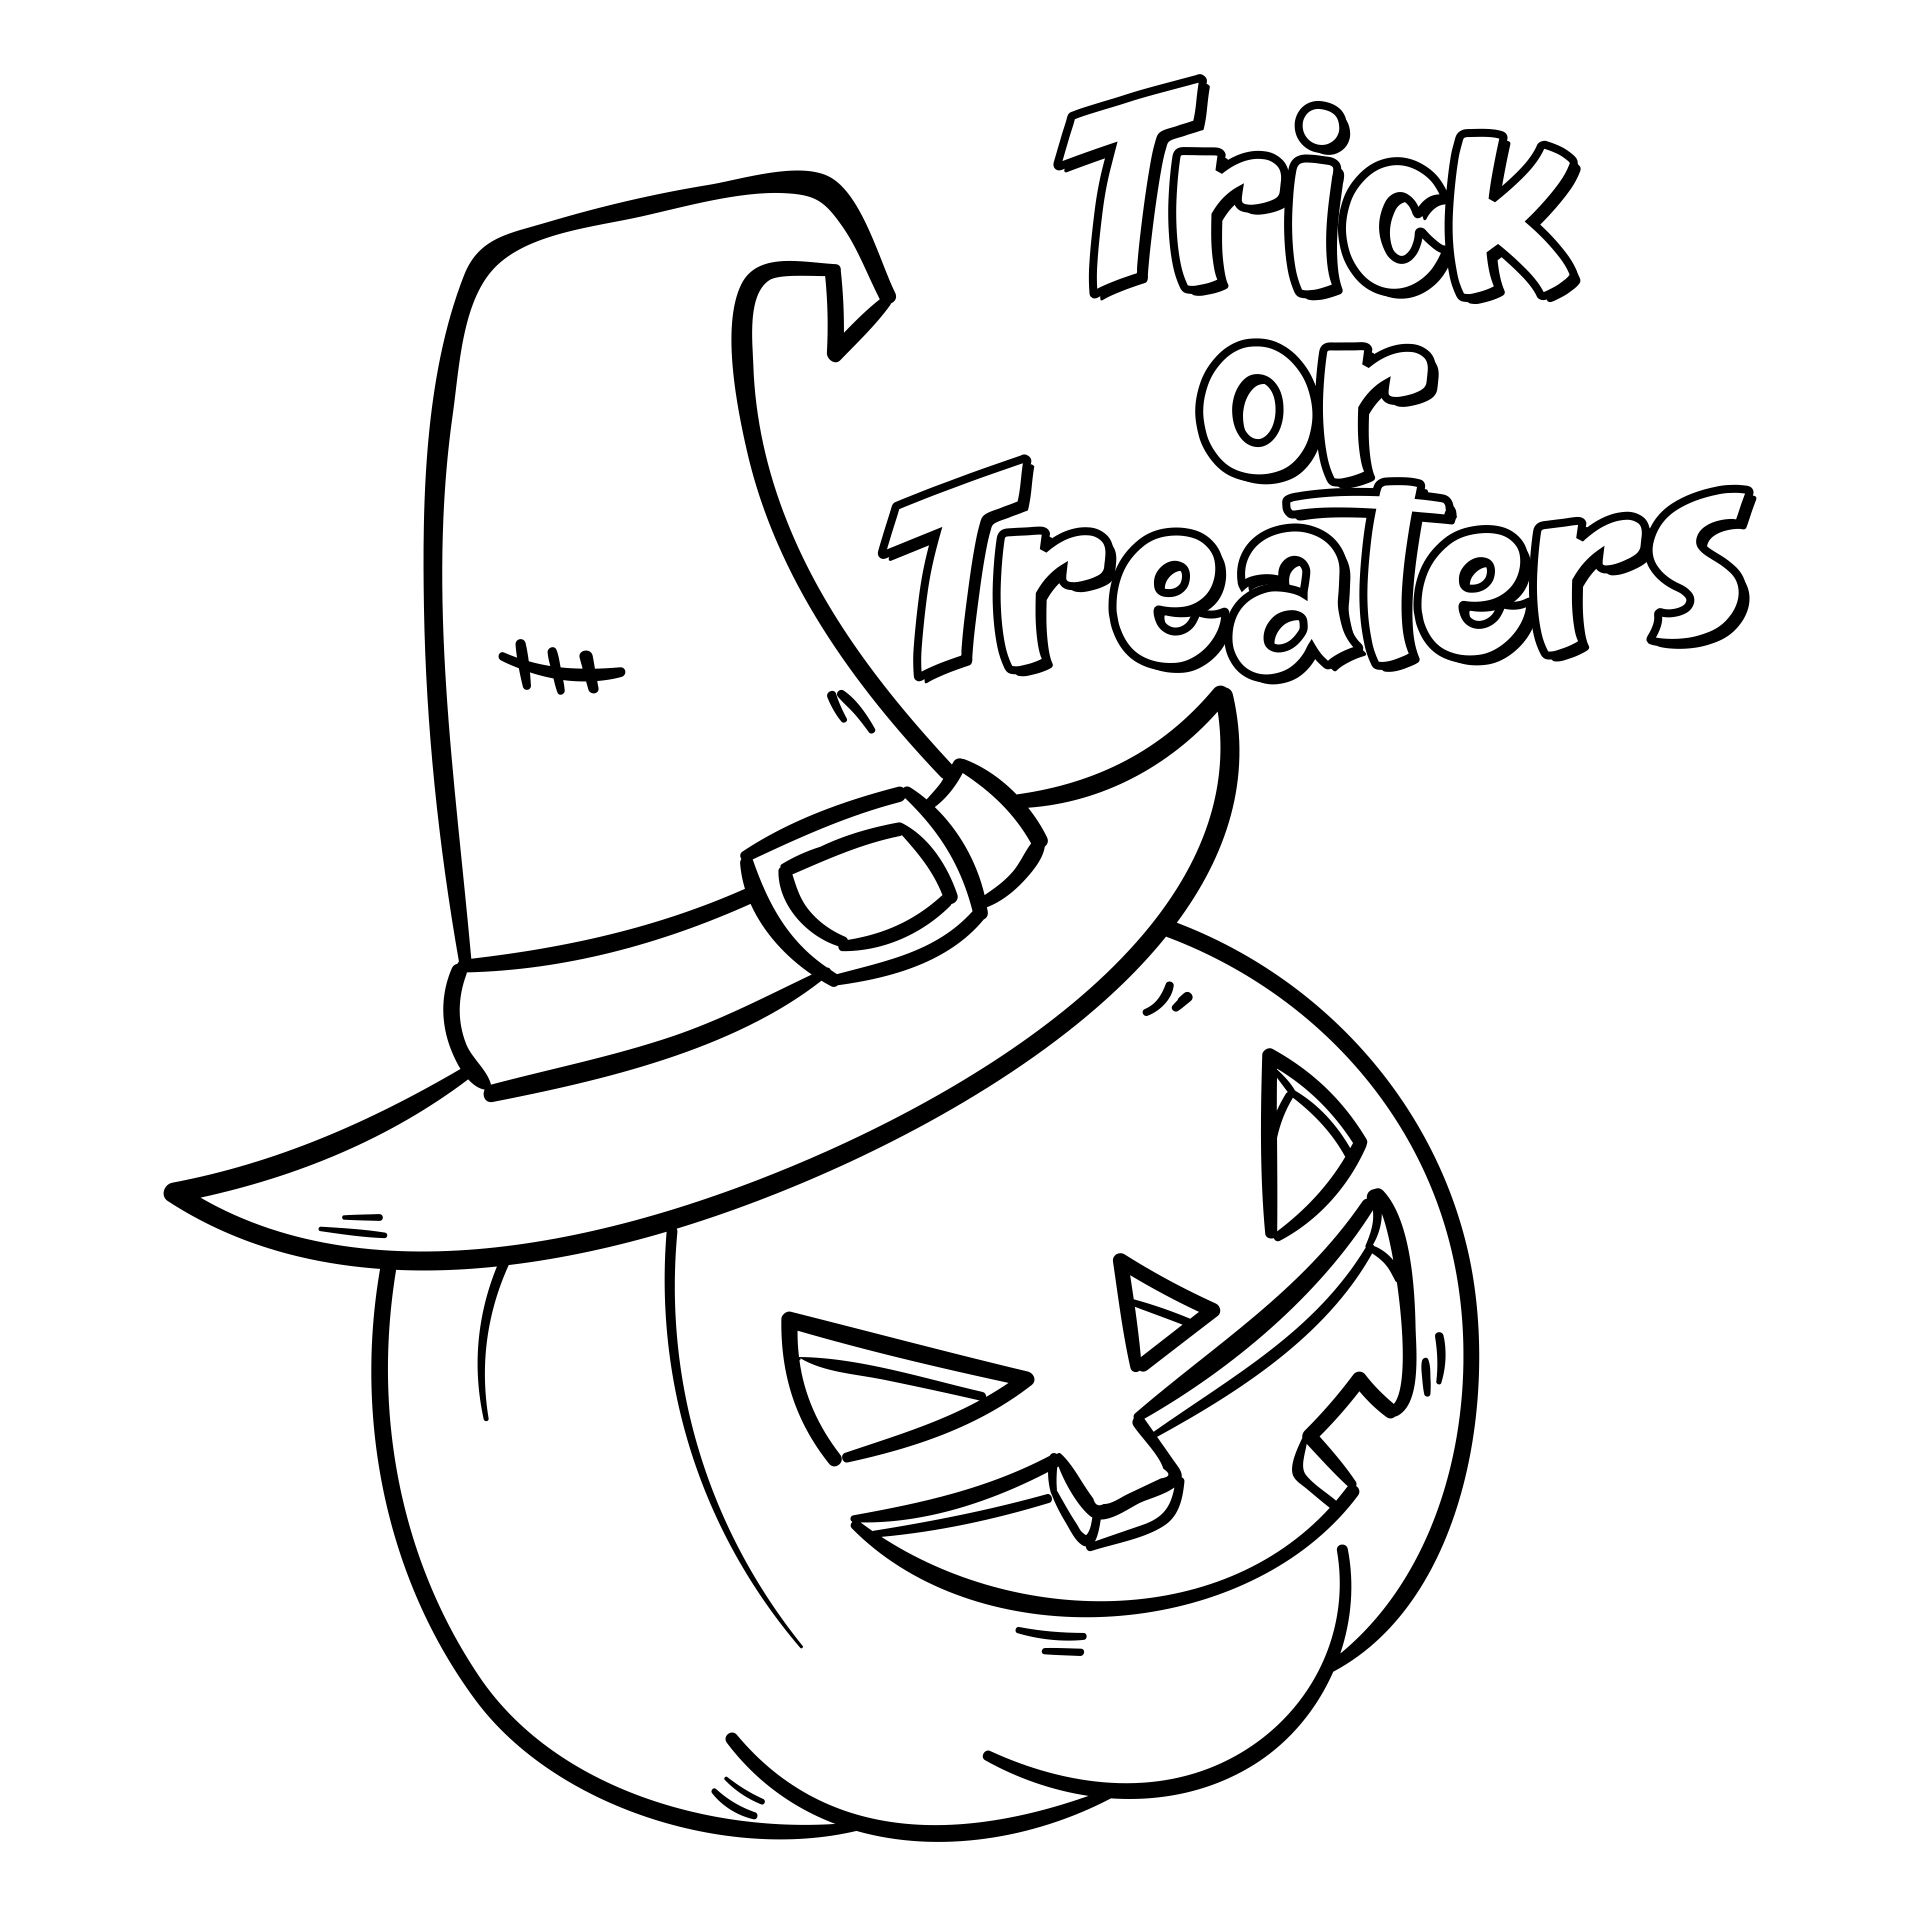 Free Halloween Coloring Pages For Kids